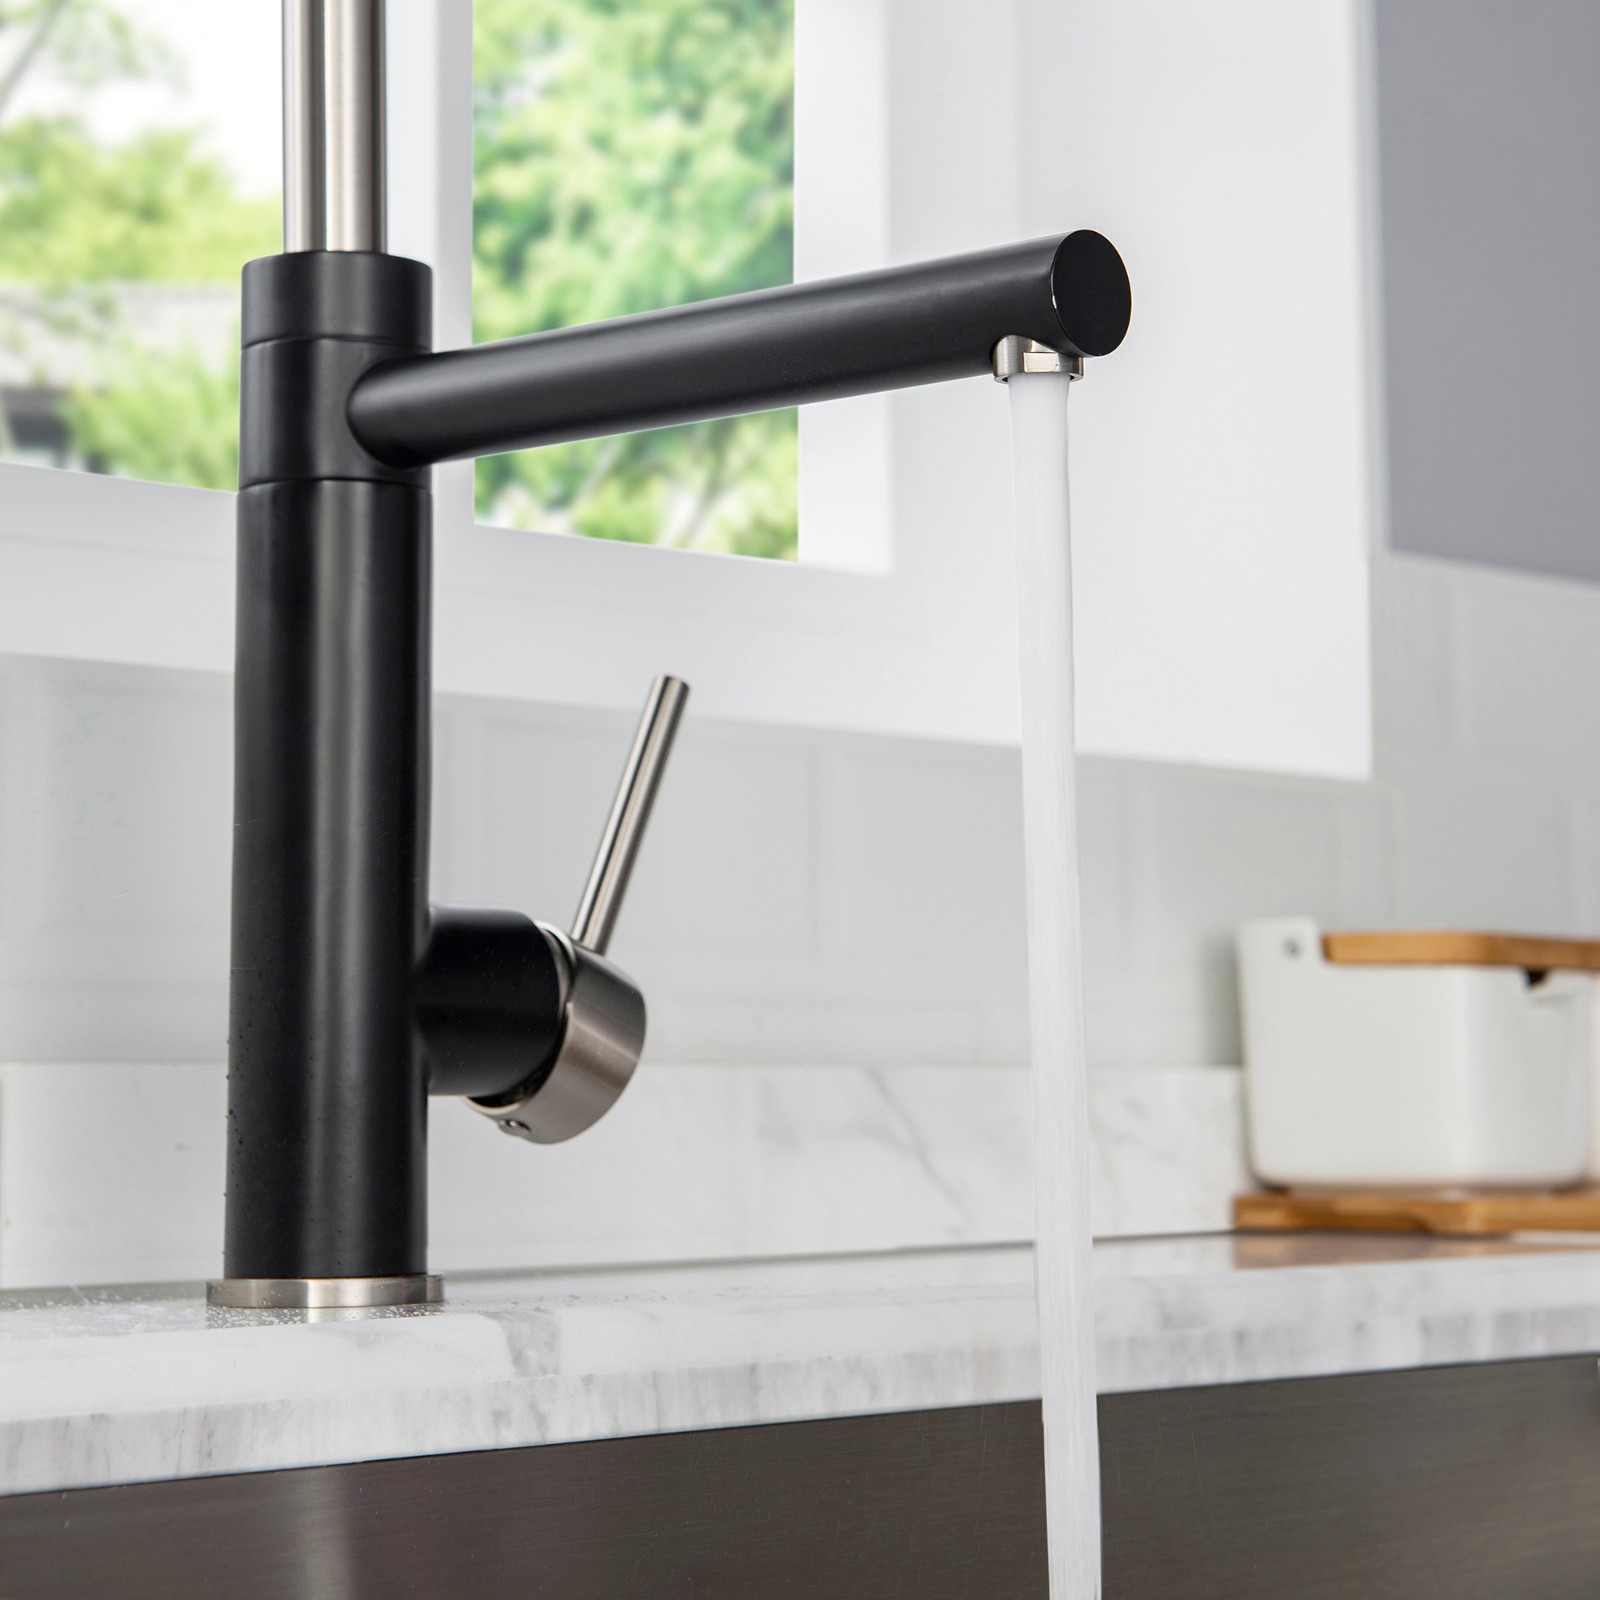  WOODBRIDGE WK060501BL Stainless Steel Single Handle Pre-Rinse Pull Down Kitchen Faucet and Pot Filler in Matte Black Finish._5034